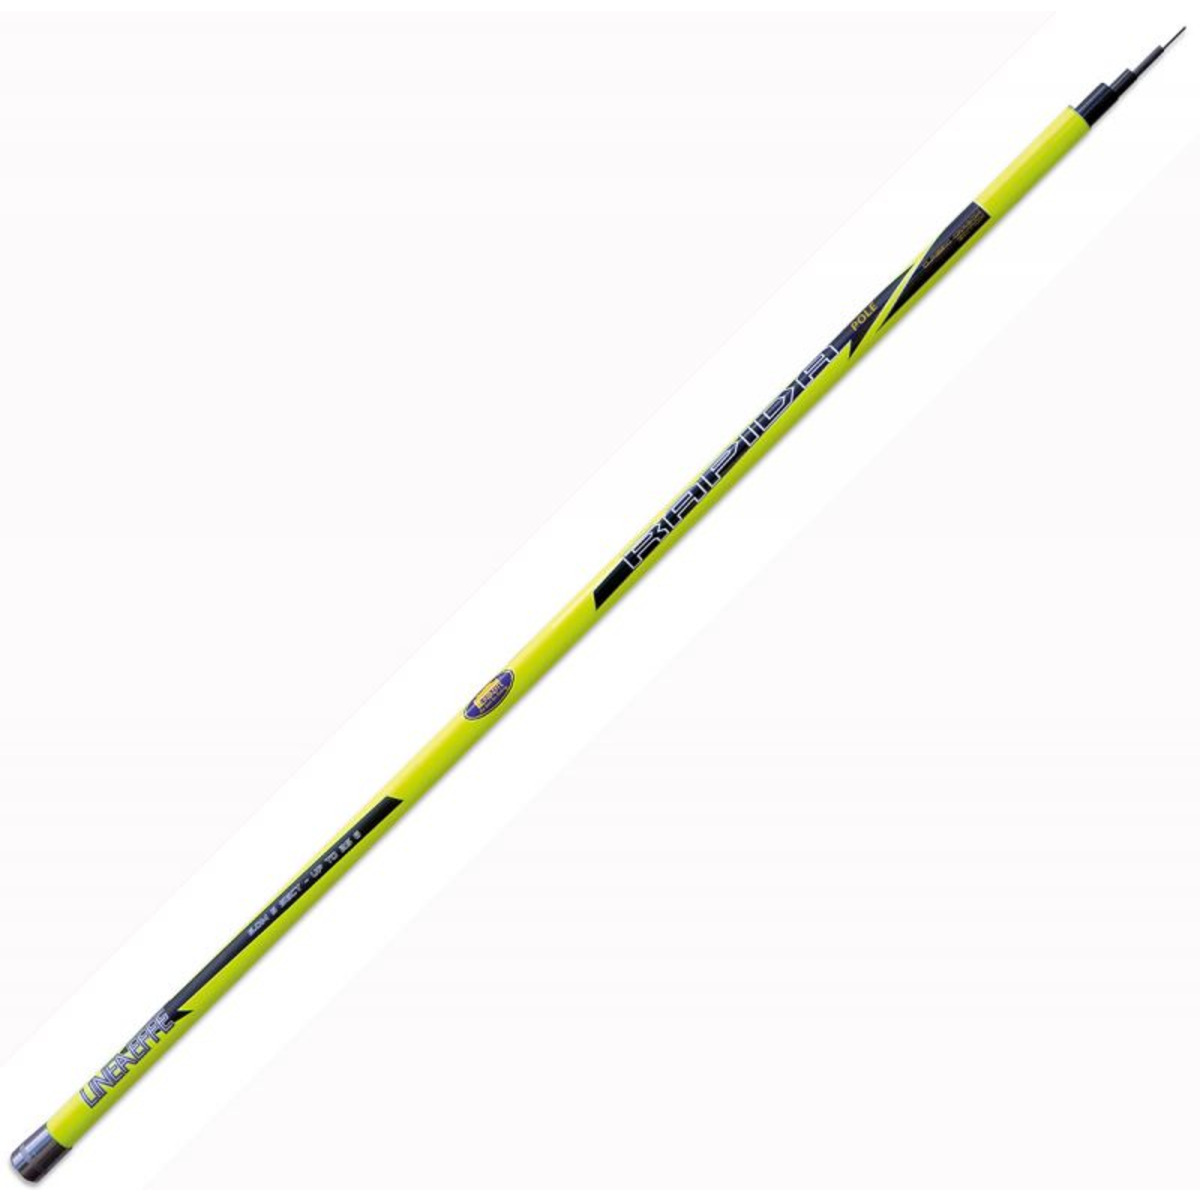 Lineaeffe Rapida Carbon Pole - 7.00 m - up to 25 g